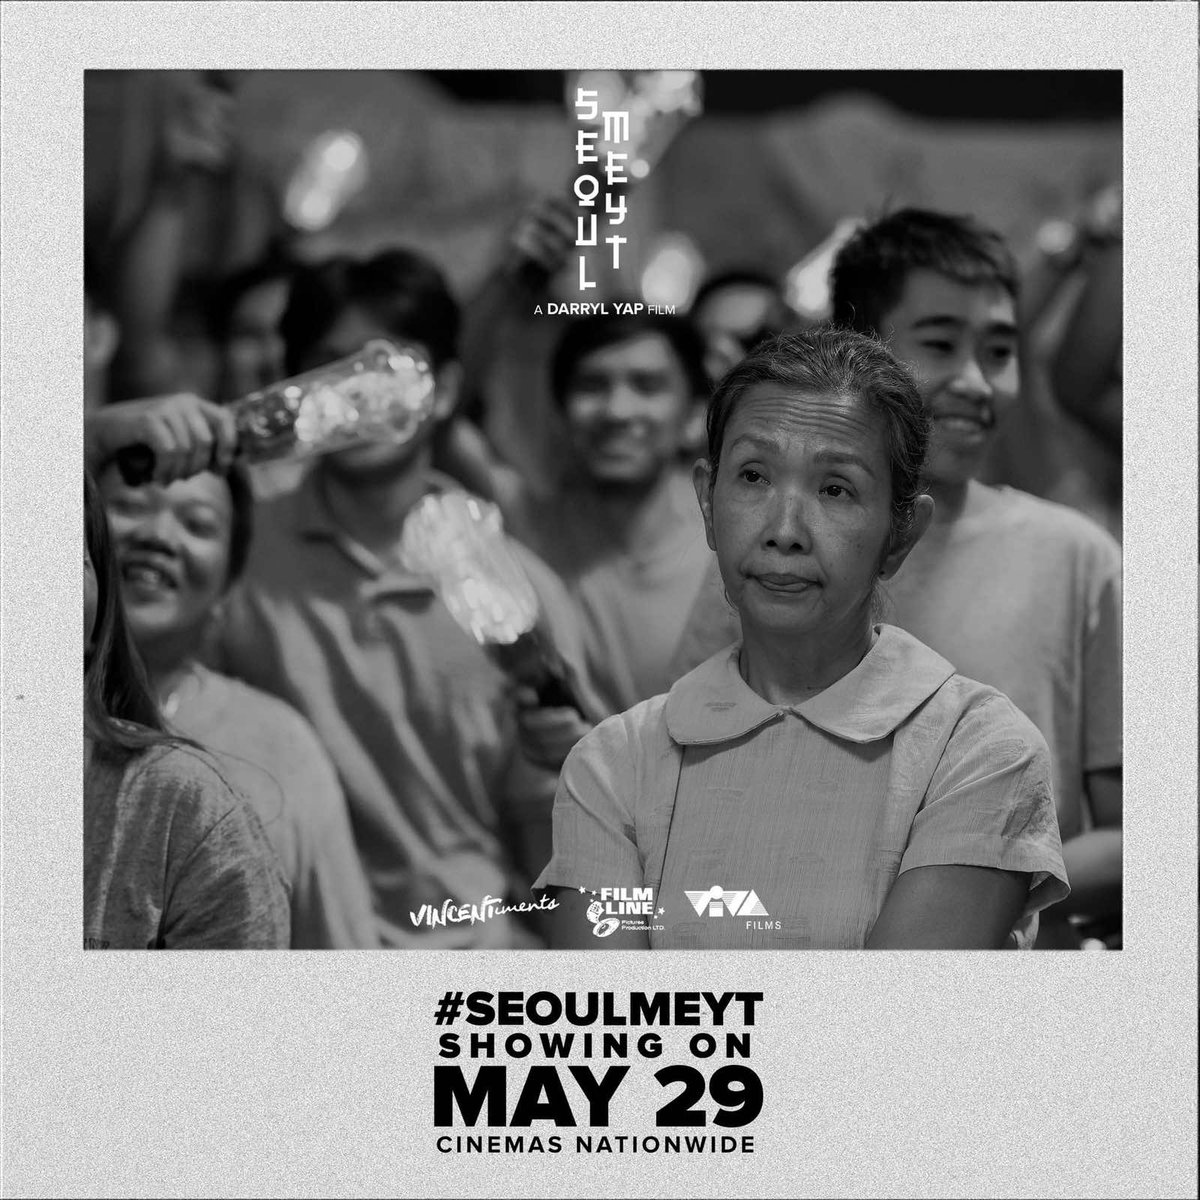 KIM MOLINA-JERALD NAPOLES with DARRYL YAP the 3rd film of the Box Office Trio! #SEOULMEYT • MAY 29